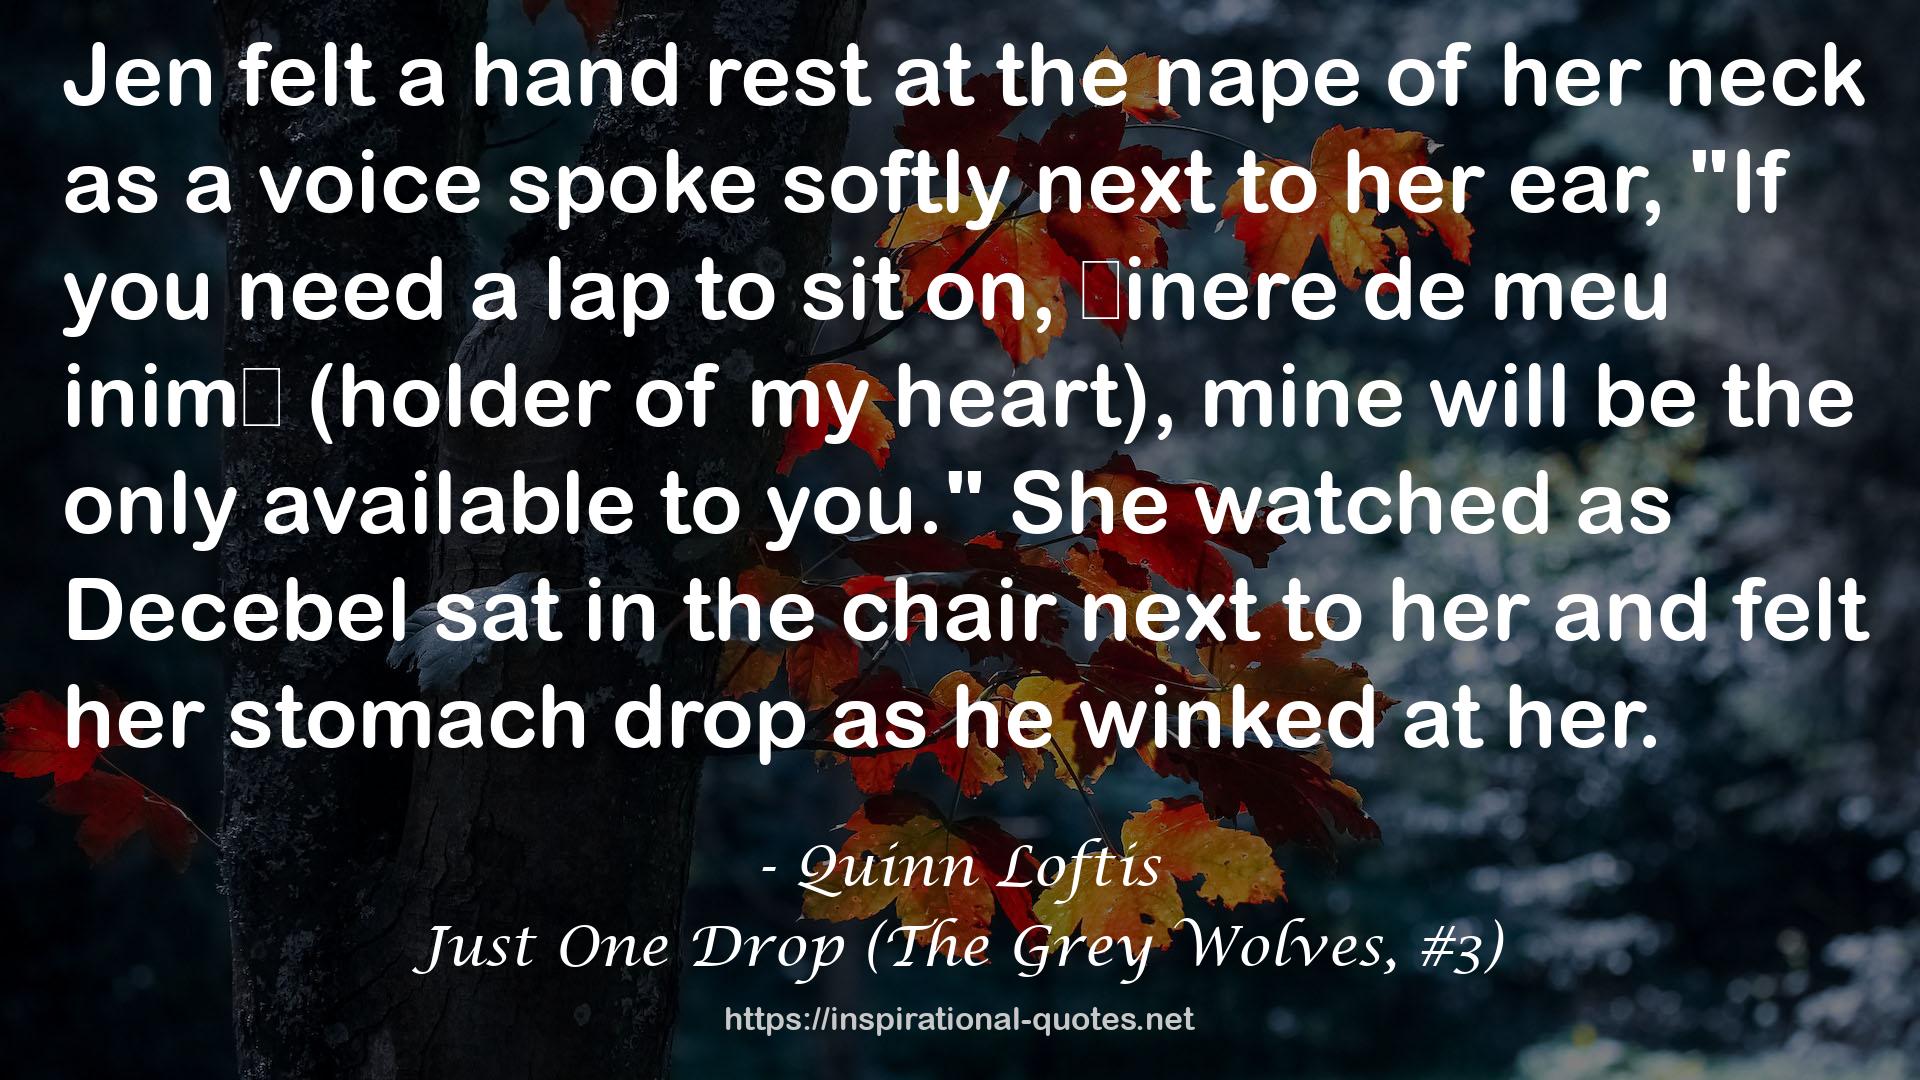 Just One Drop (The Grey Wolves, #3) QUOTES